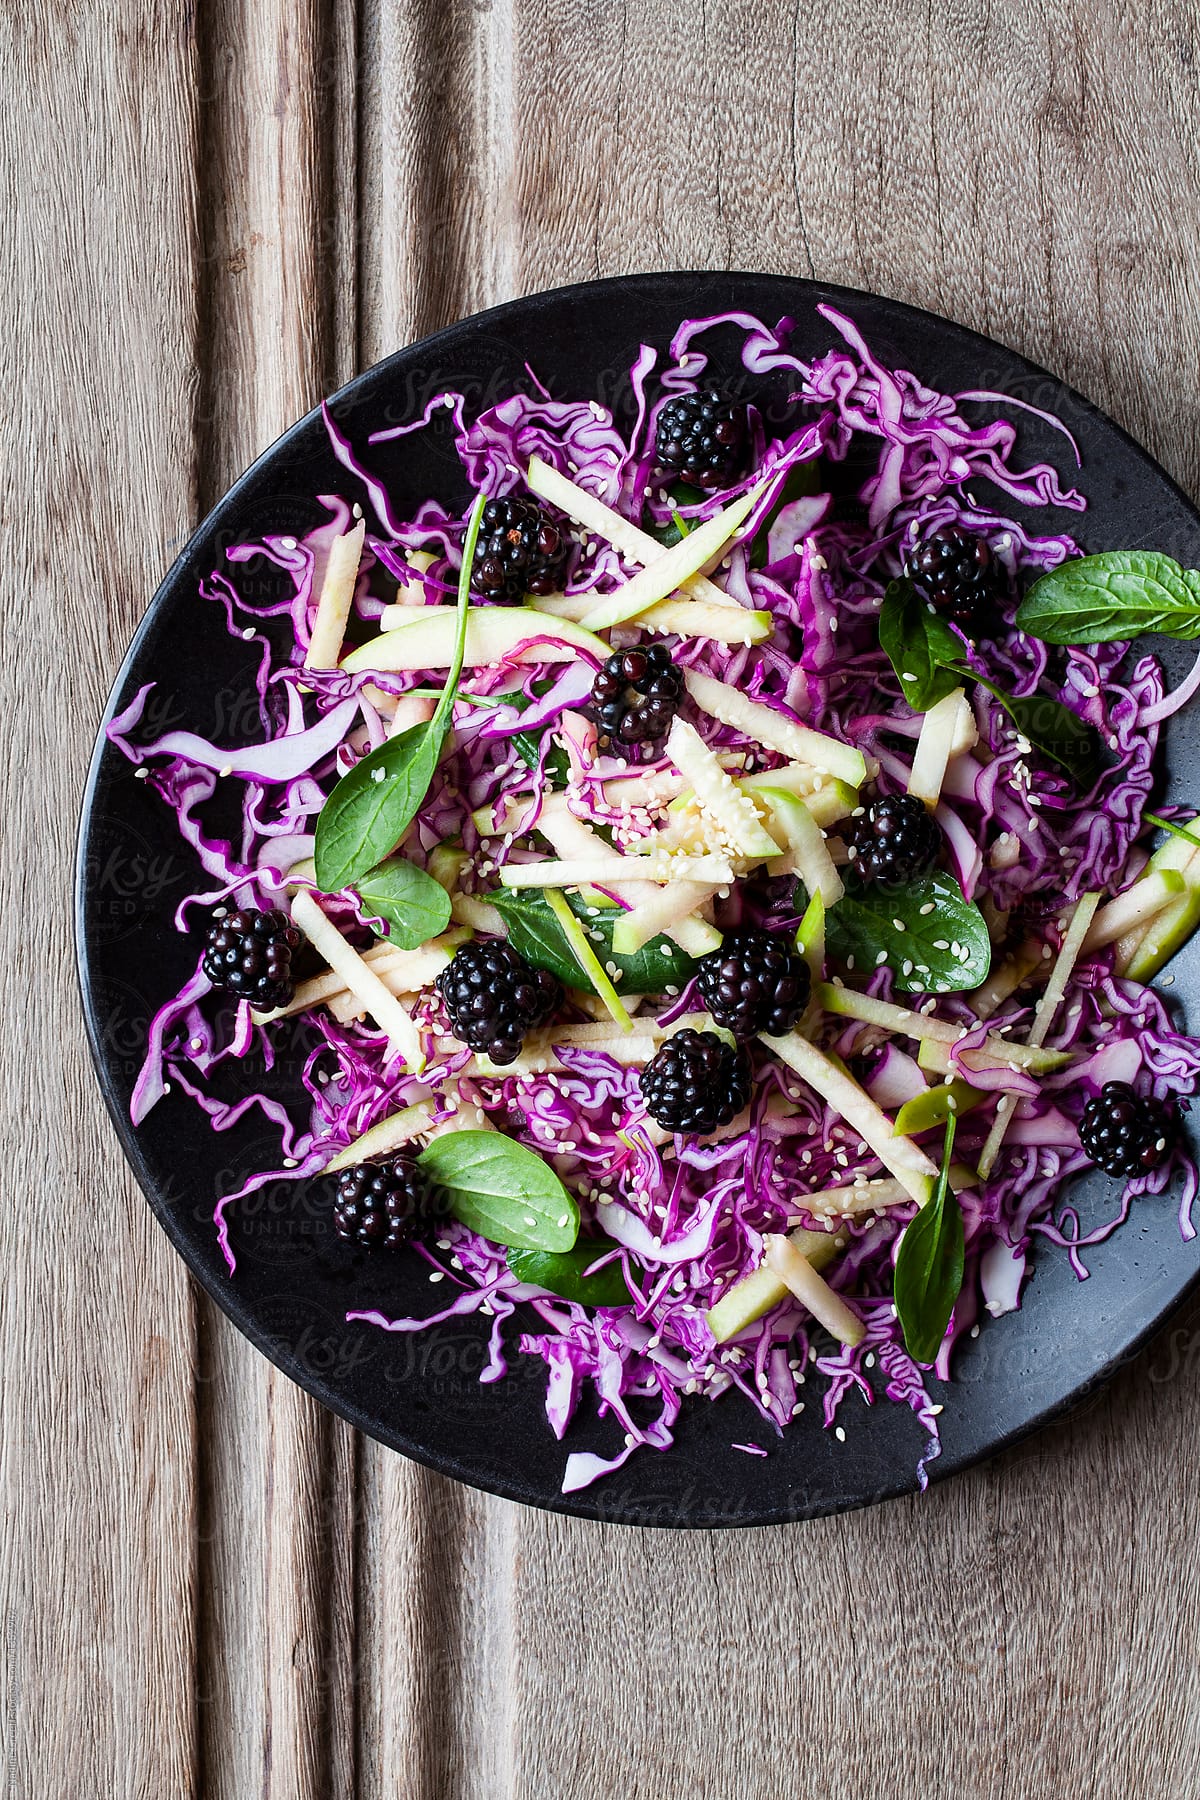 Blackberry coleslaw with finely shredded cabbage, apple and spinach